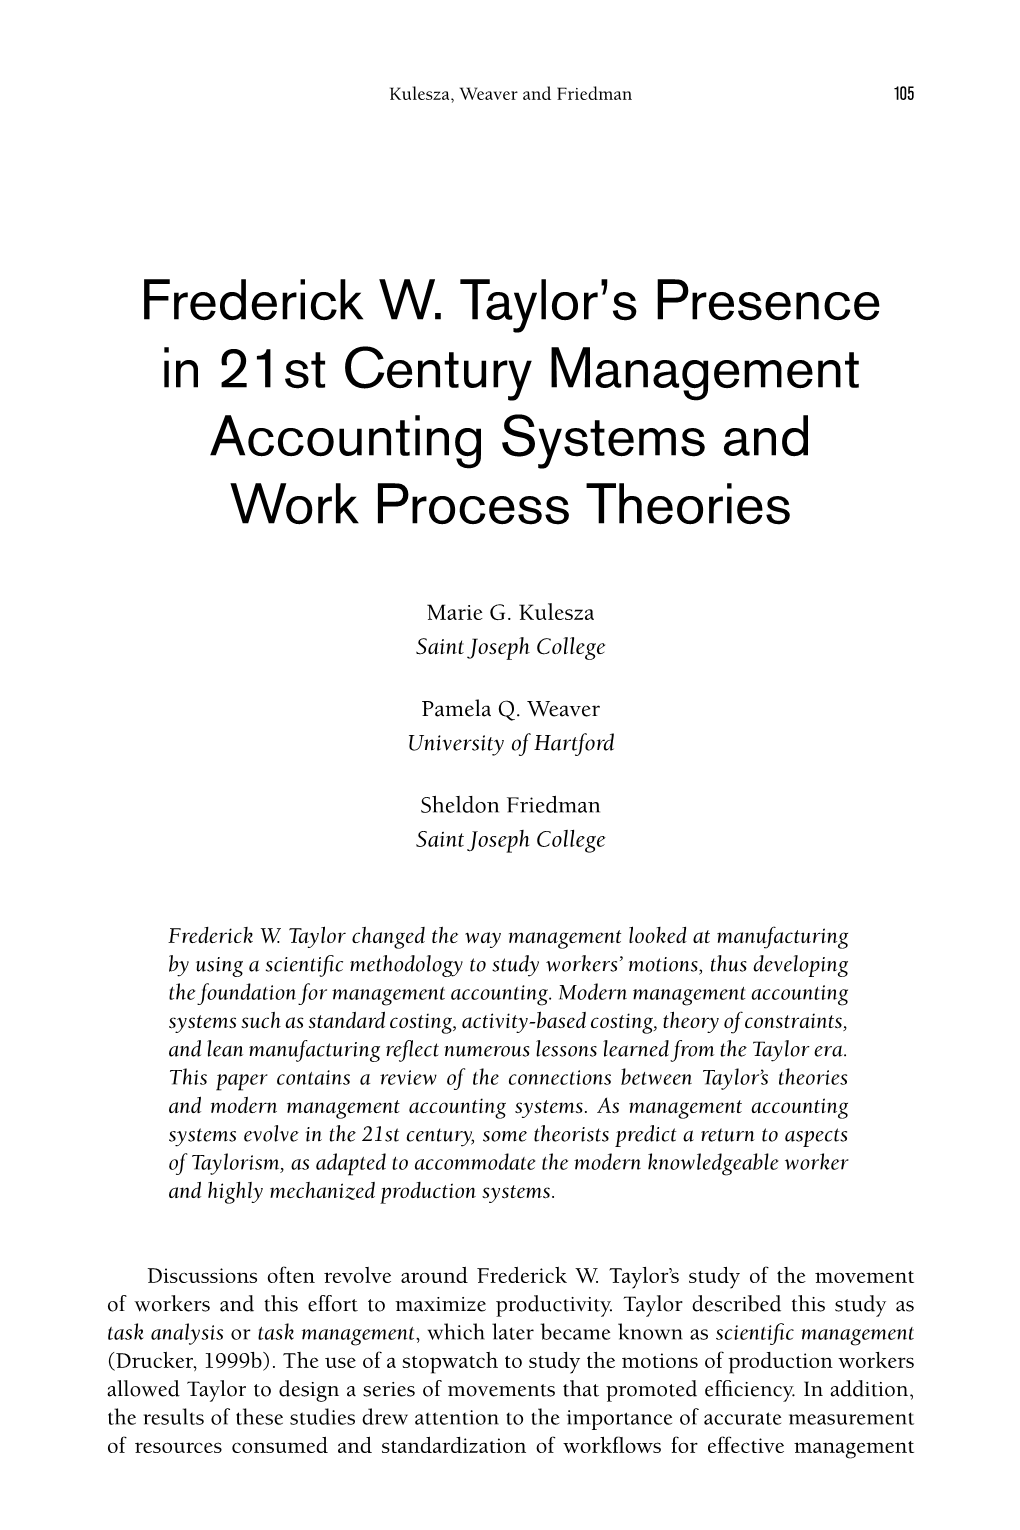 Frederick W. Taylor's Presence in 21St Century Management Accounting